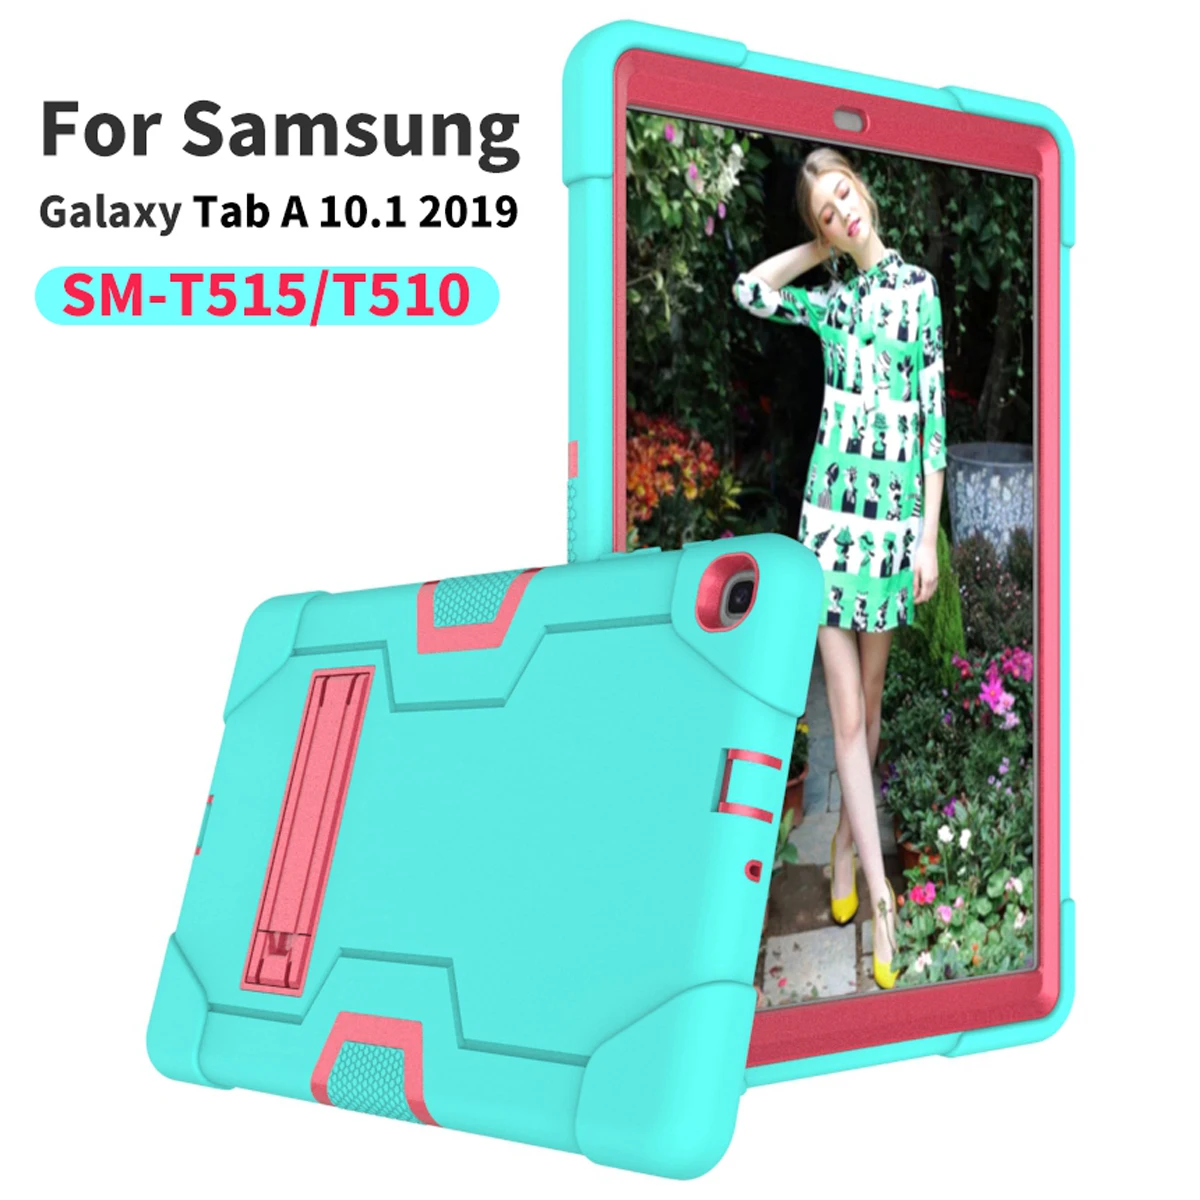 

For Samsung Galaxy Tab A 10.1 SM T515 T510 2019 Shock Proof Full Body Kids Children Safe Cover Drop Resistance Tablet Case Stand